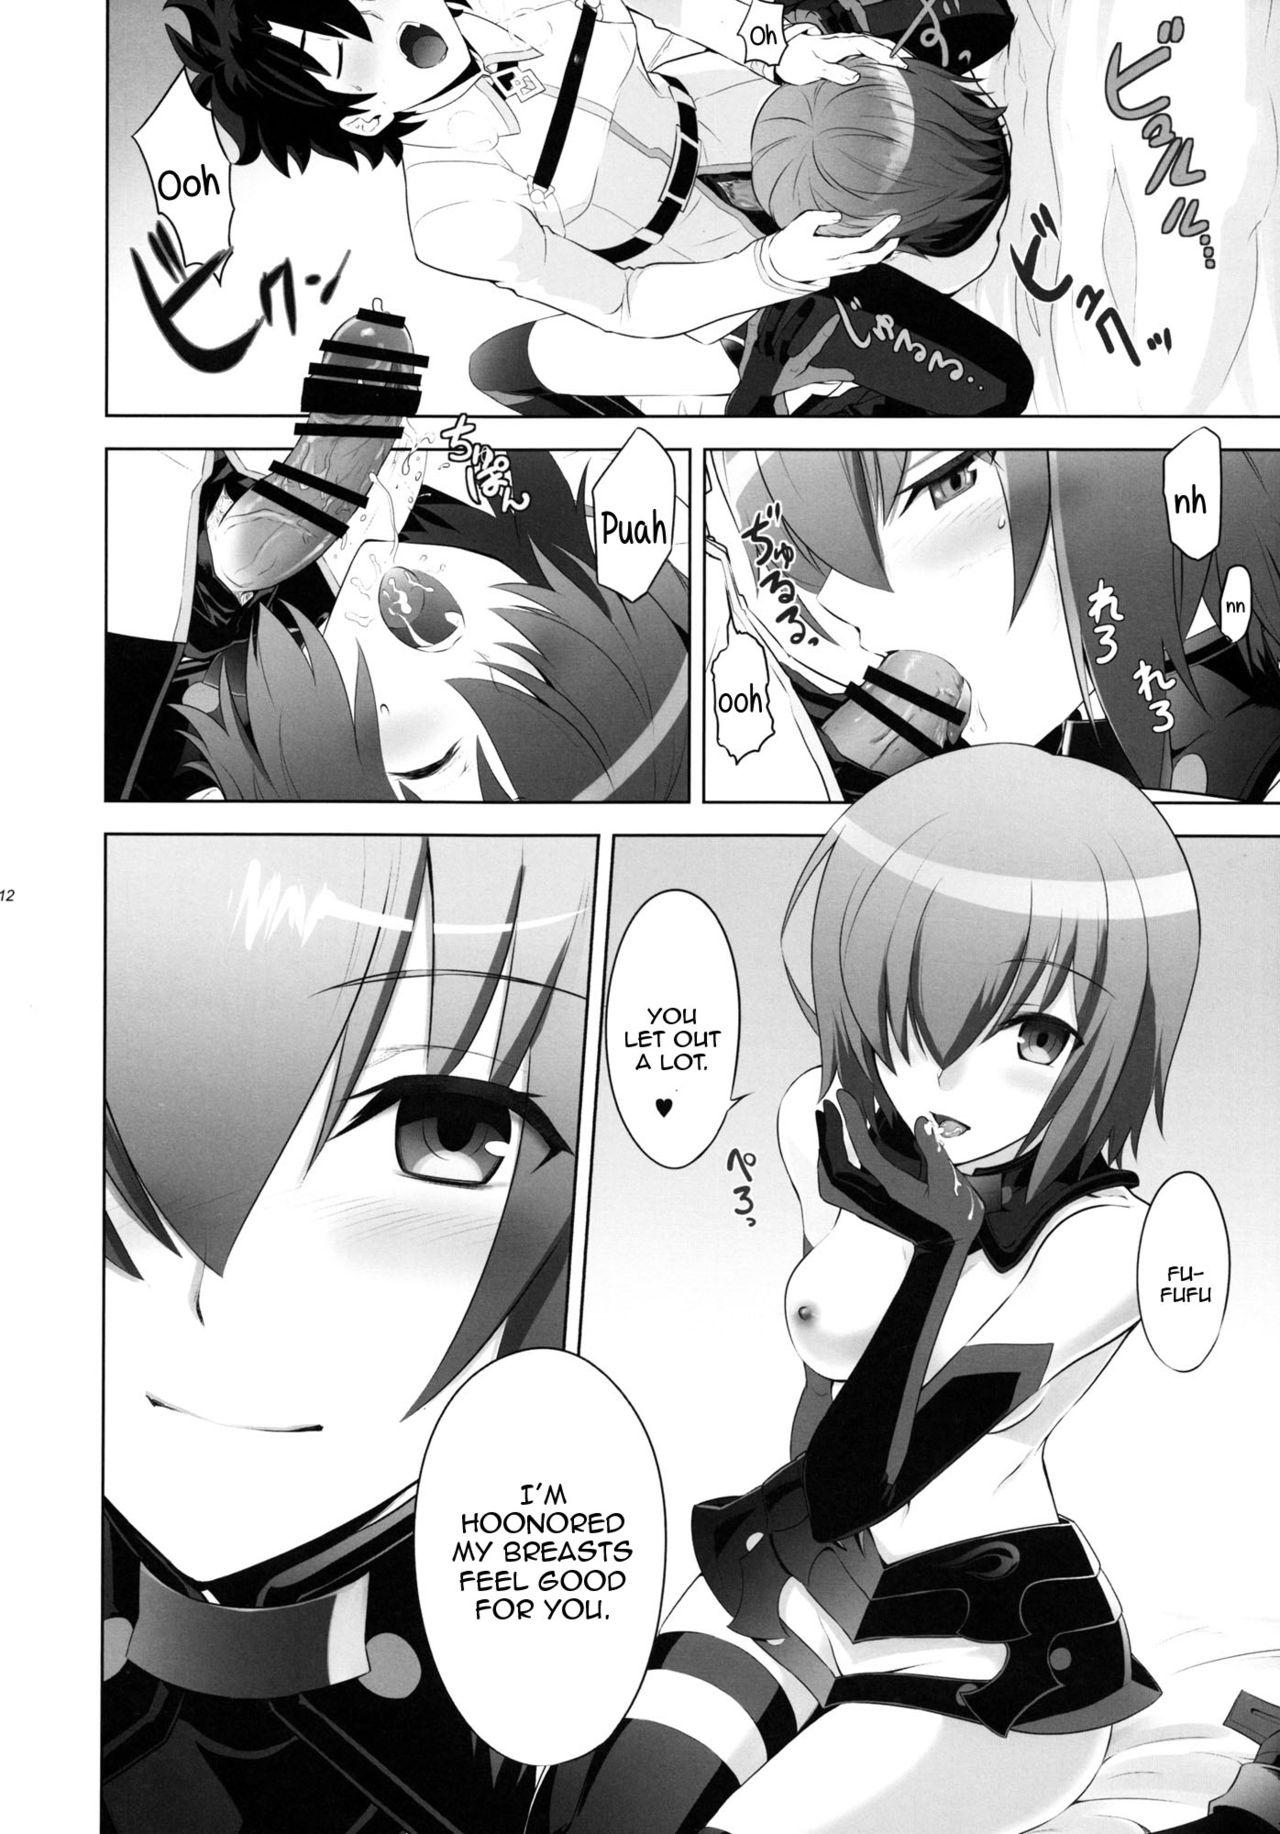 Skinny T*MOON COMPLEX GO 06 - Fate grand order Yanks Featured - Page 11